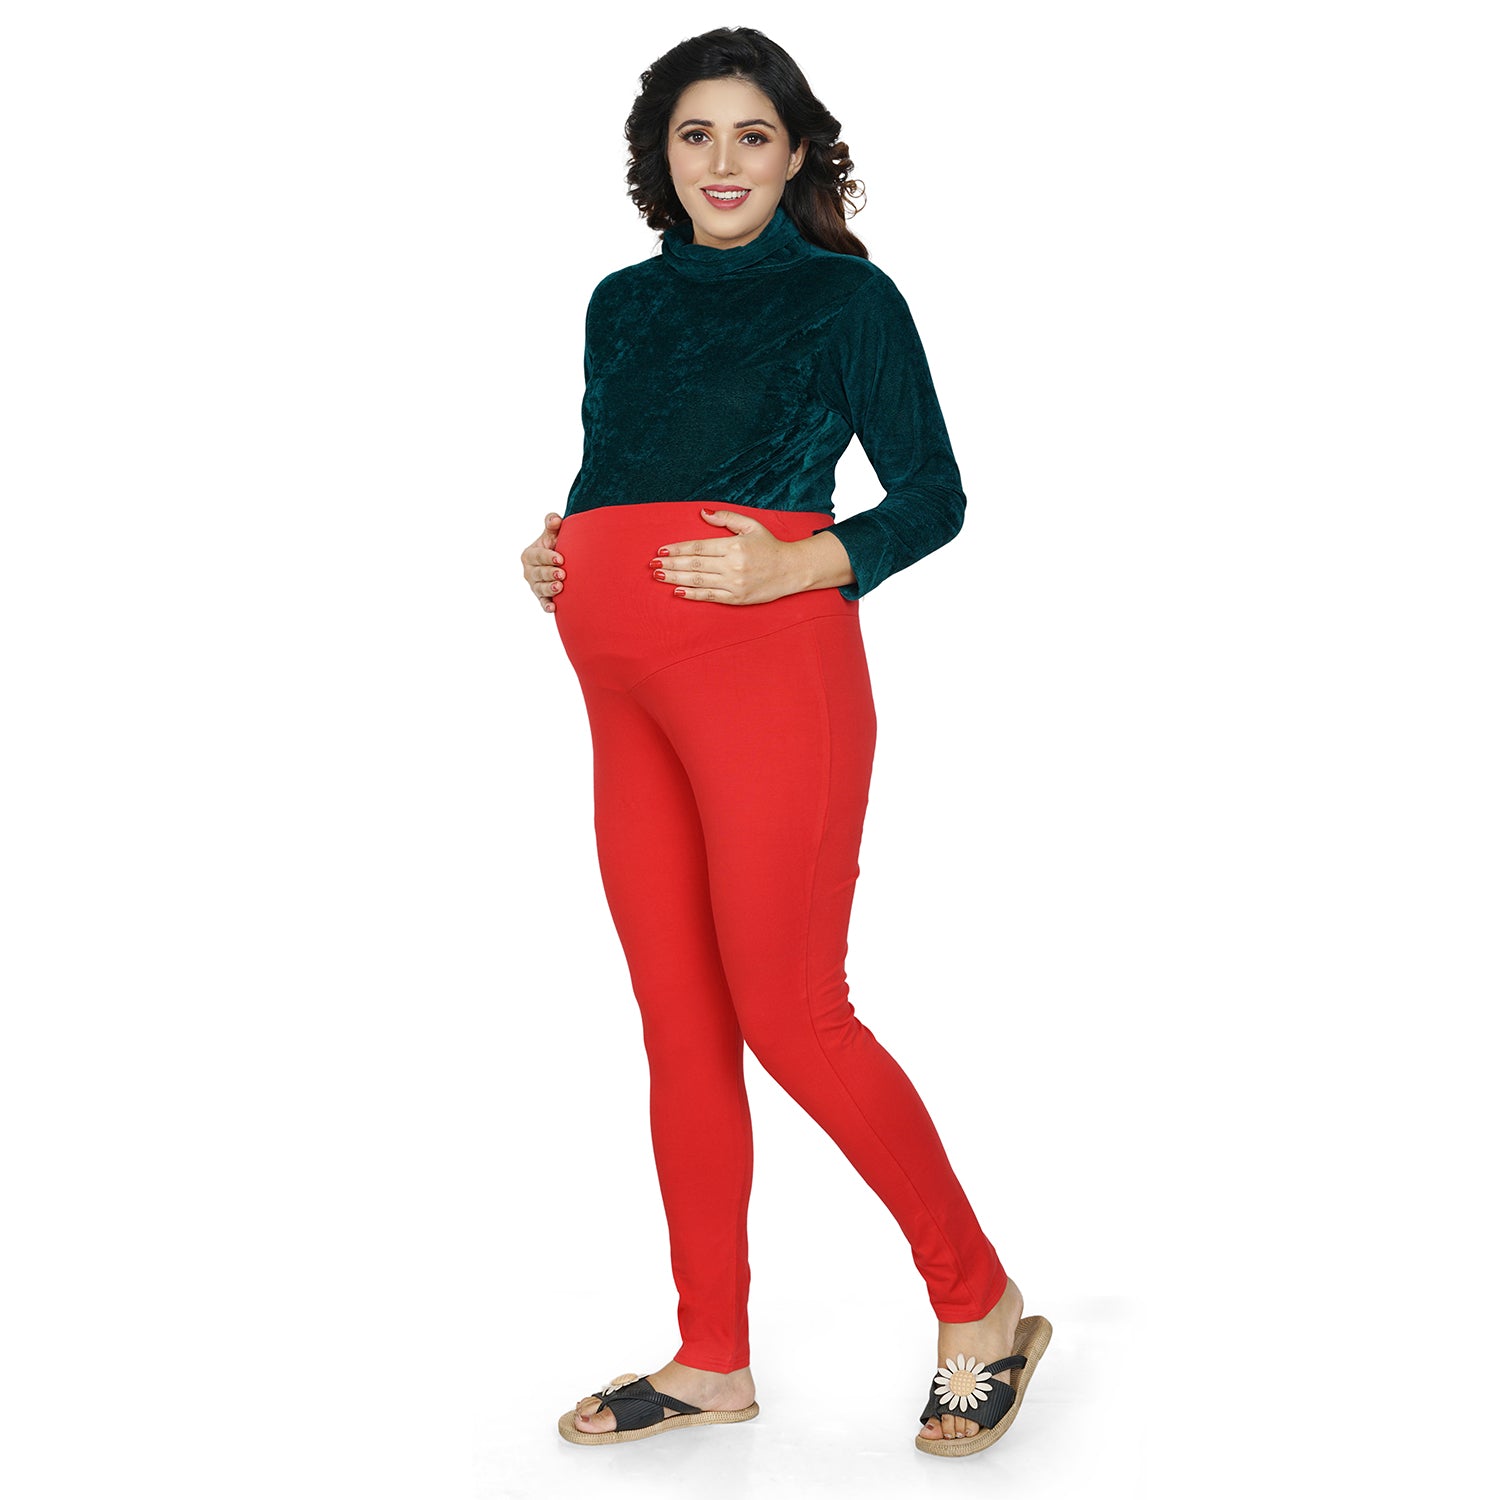 Baby Moo Soft And Comfy Full Length Maternity Leggings Solid - Red - Baby Moo